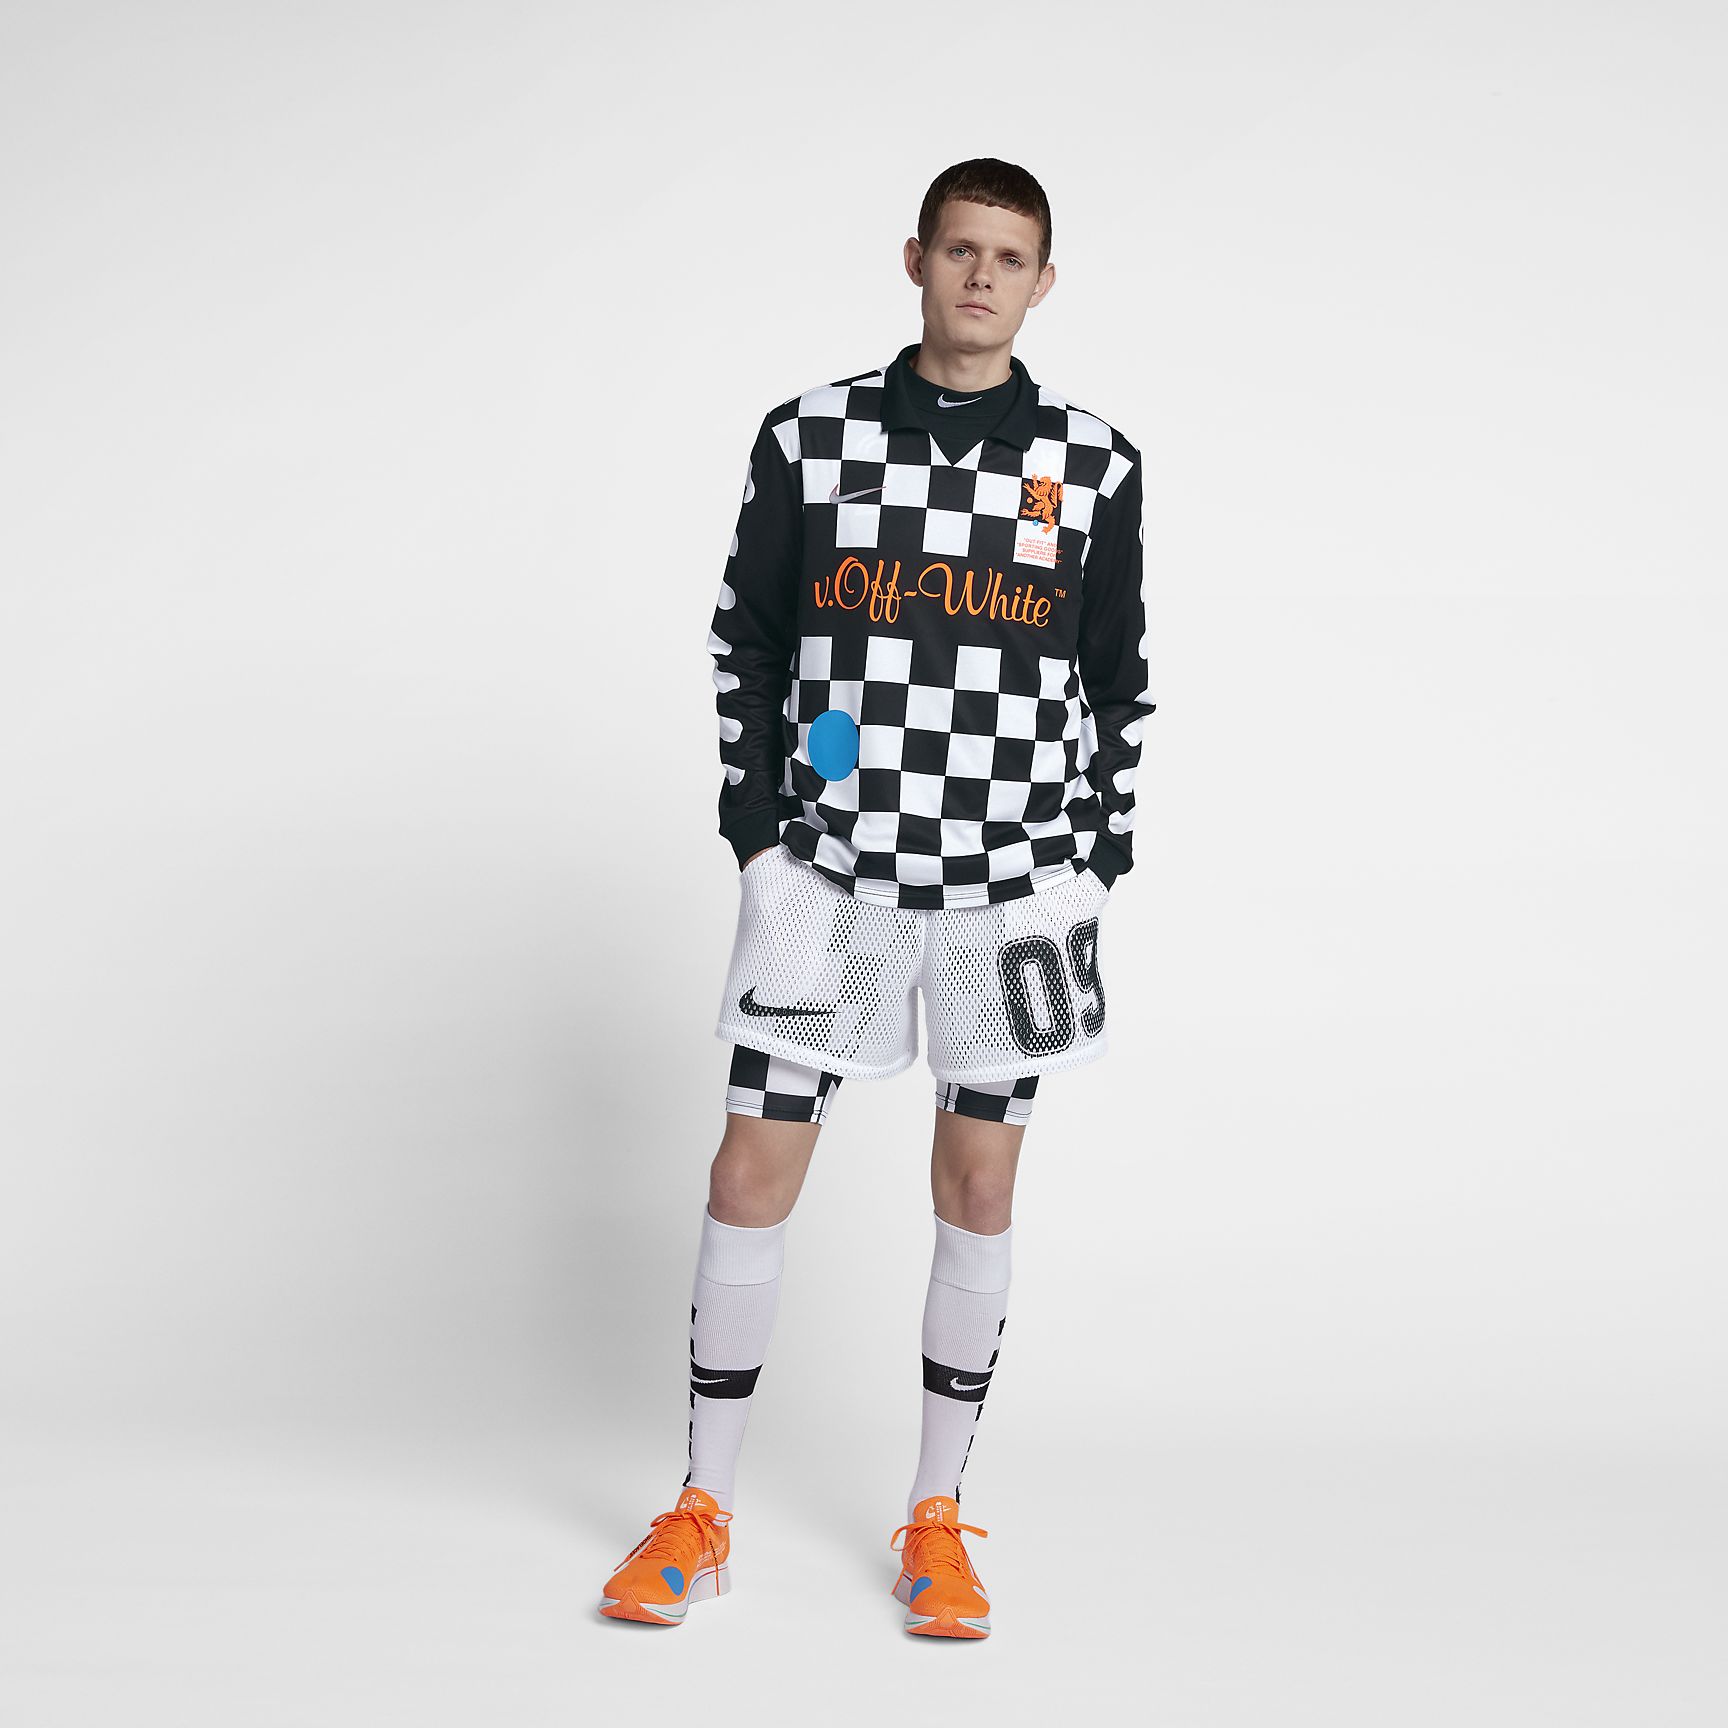 nike off white soccer jersey